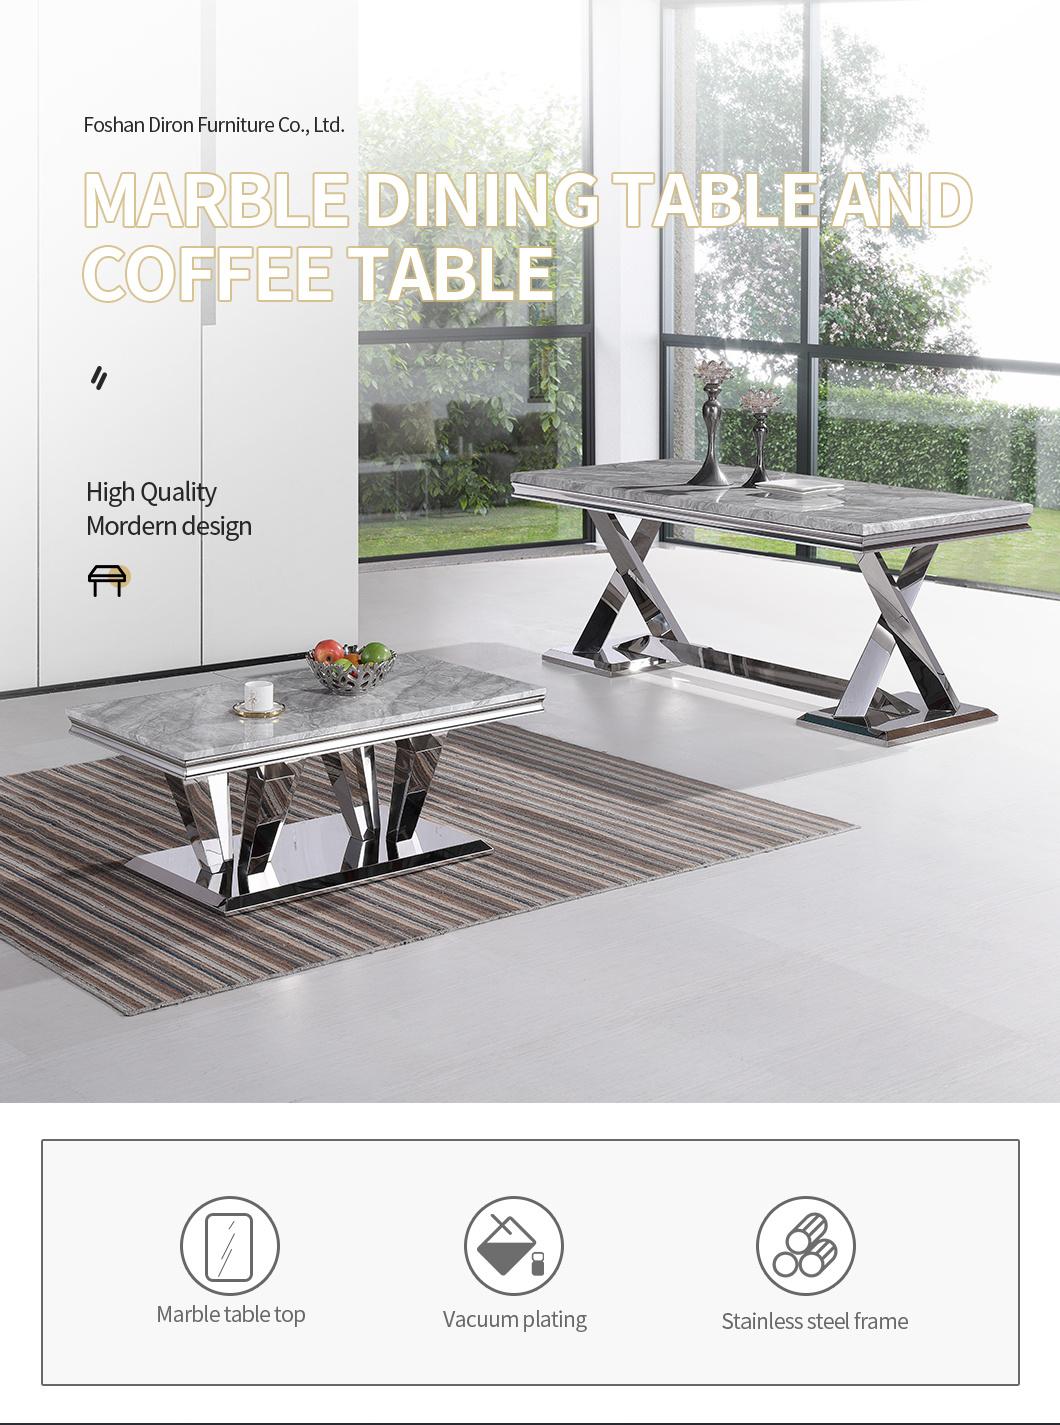 Hot Sale Customizable New Luxury Modern Dining Room Home Furniture Marble Dining Table Set